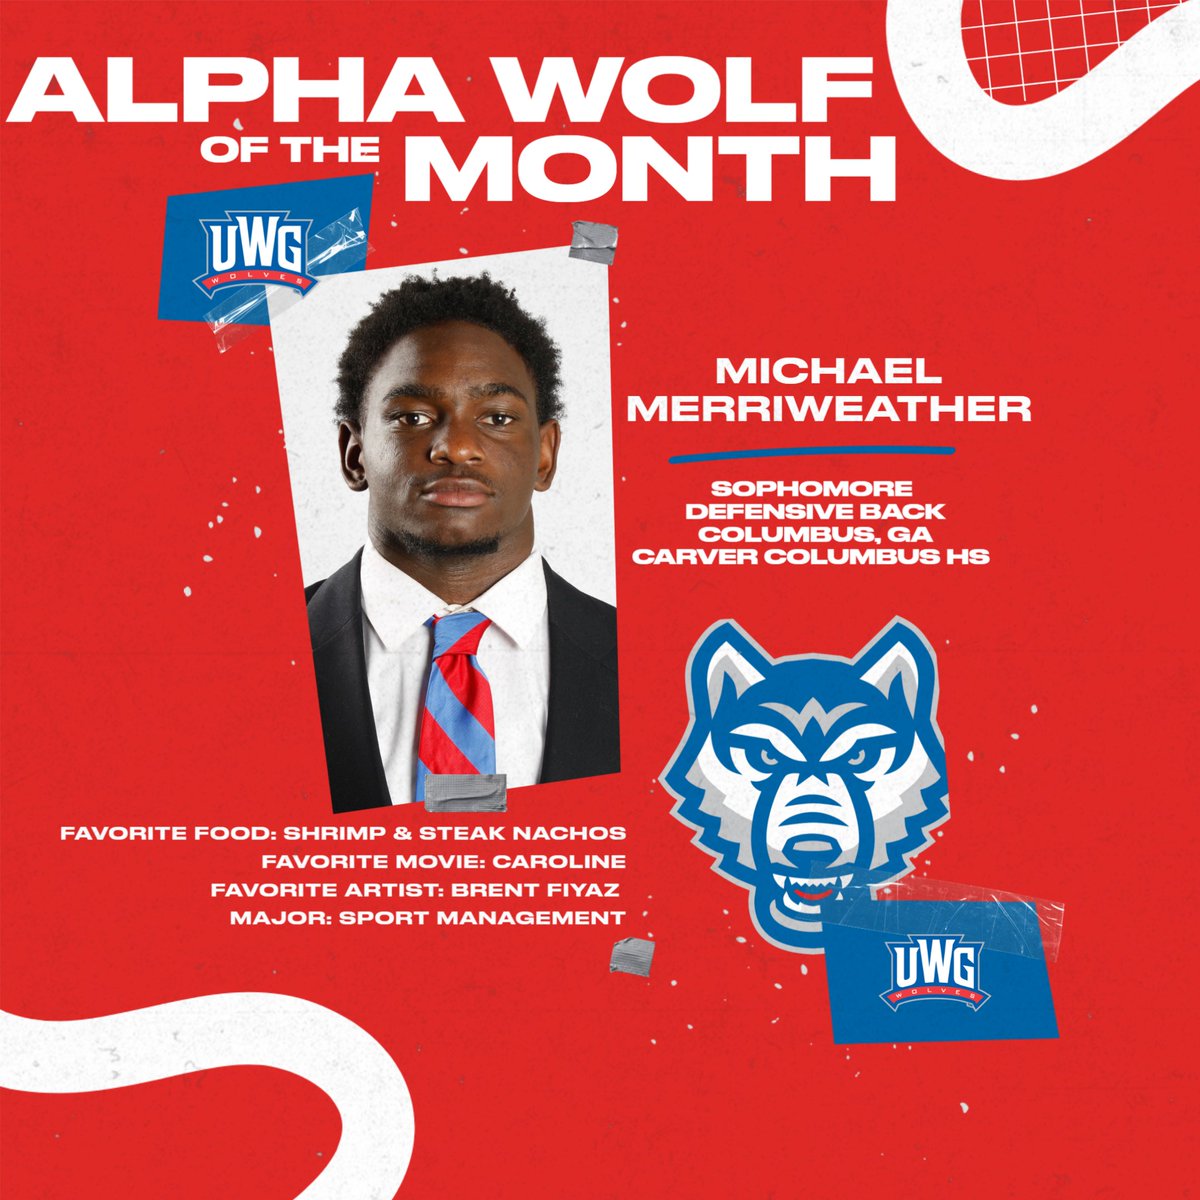 Congrats to Mike on being named our Alpha Wolf of the Month! #WeRunTogether #WestIsComing